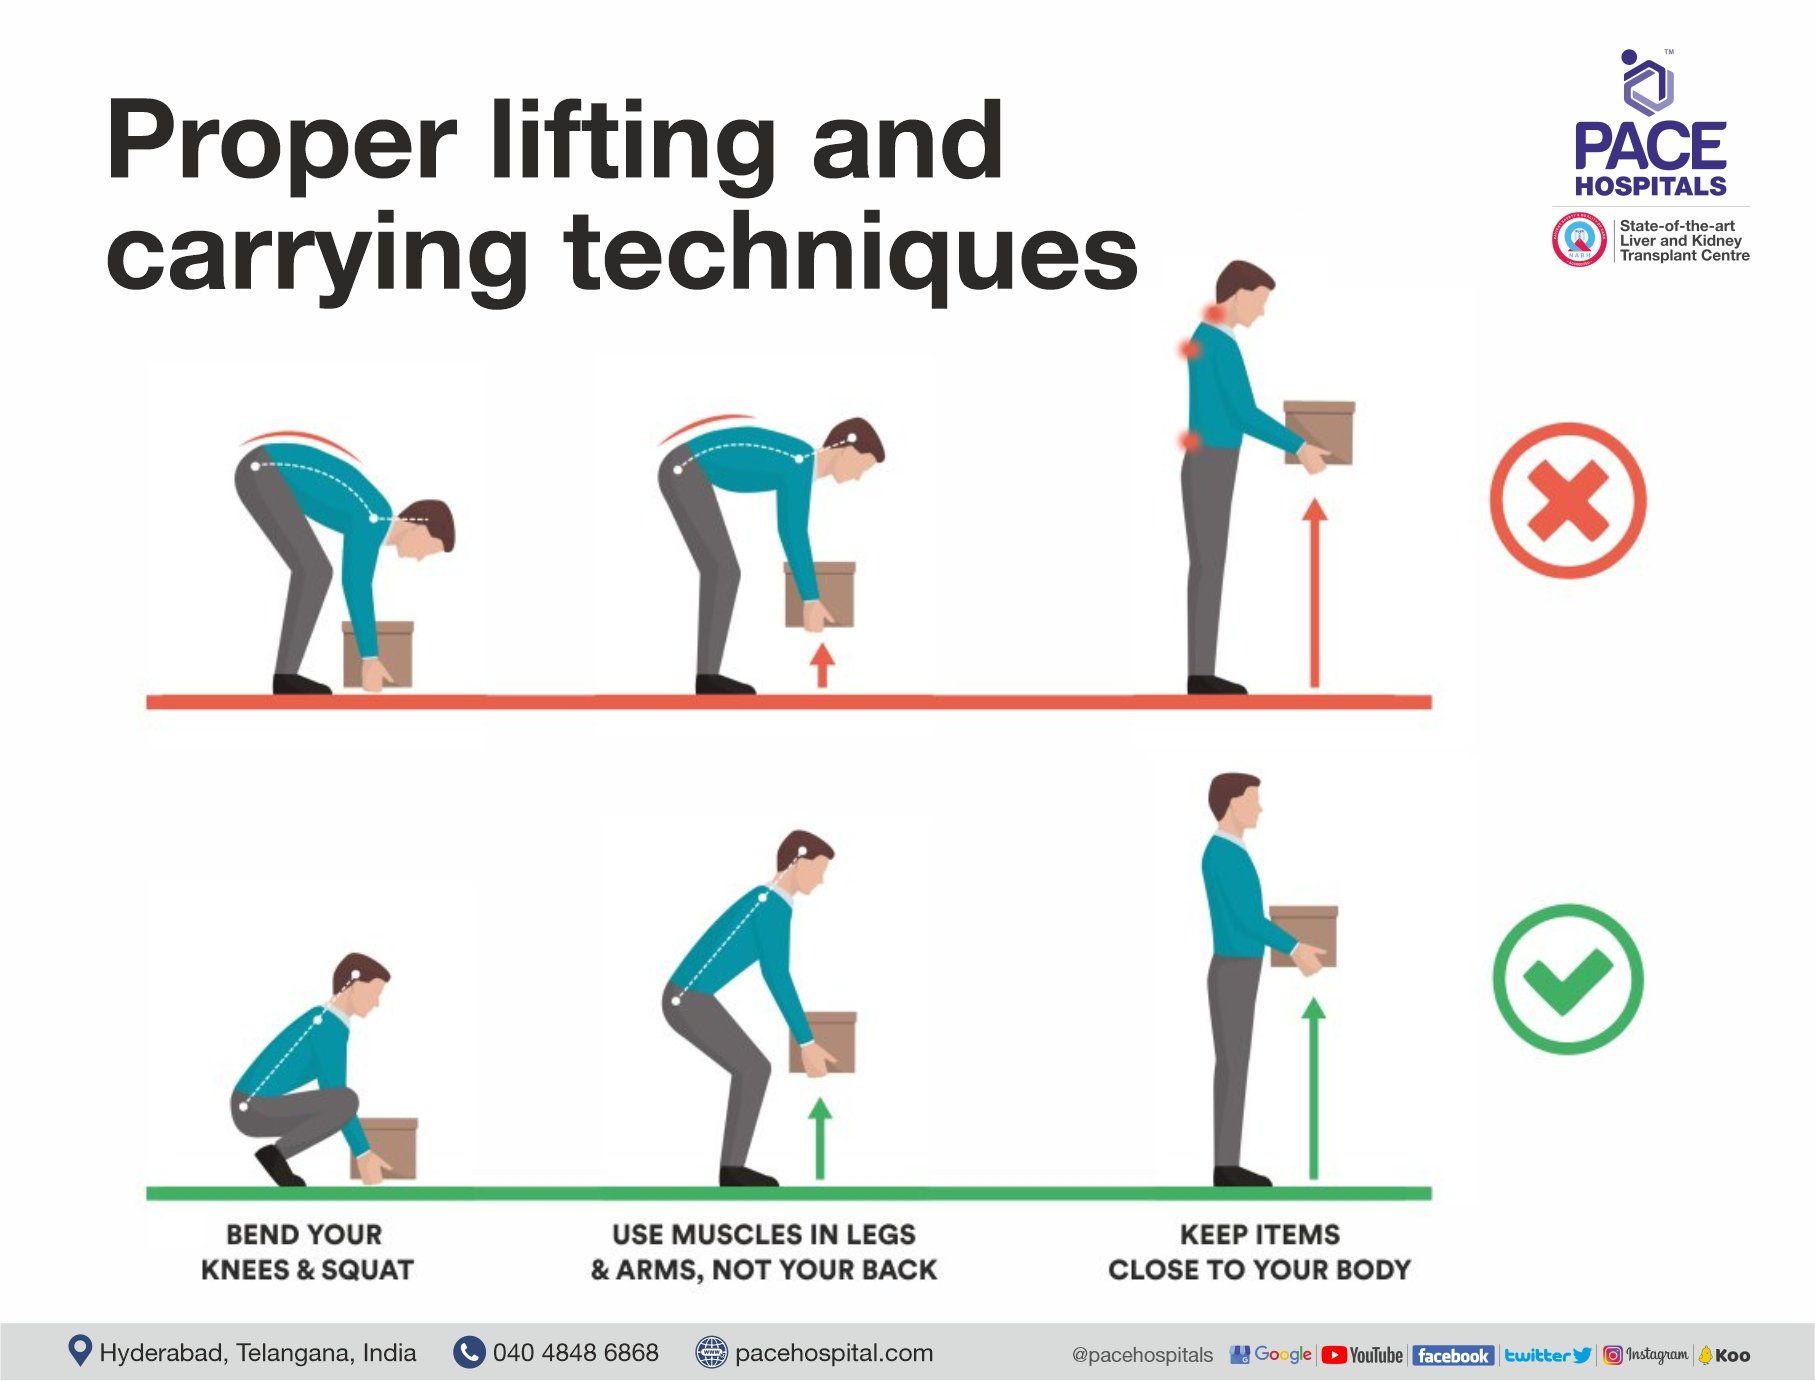 Proper lifting and carrying techniques to avoid having low back pain | Pace Hospitals